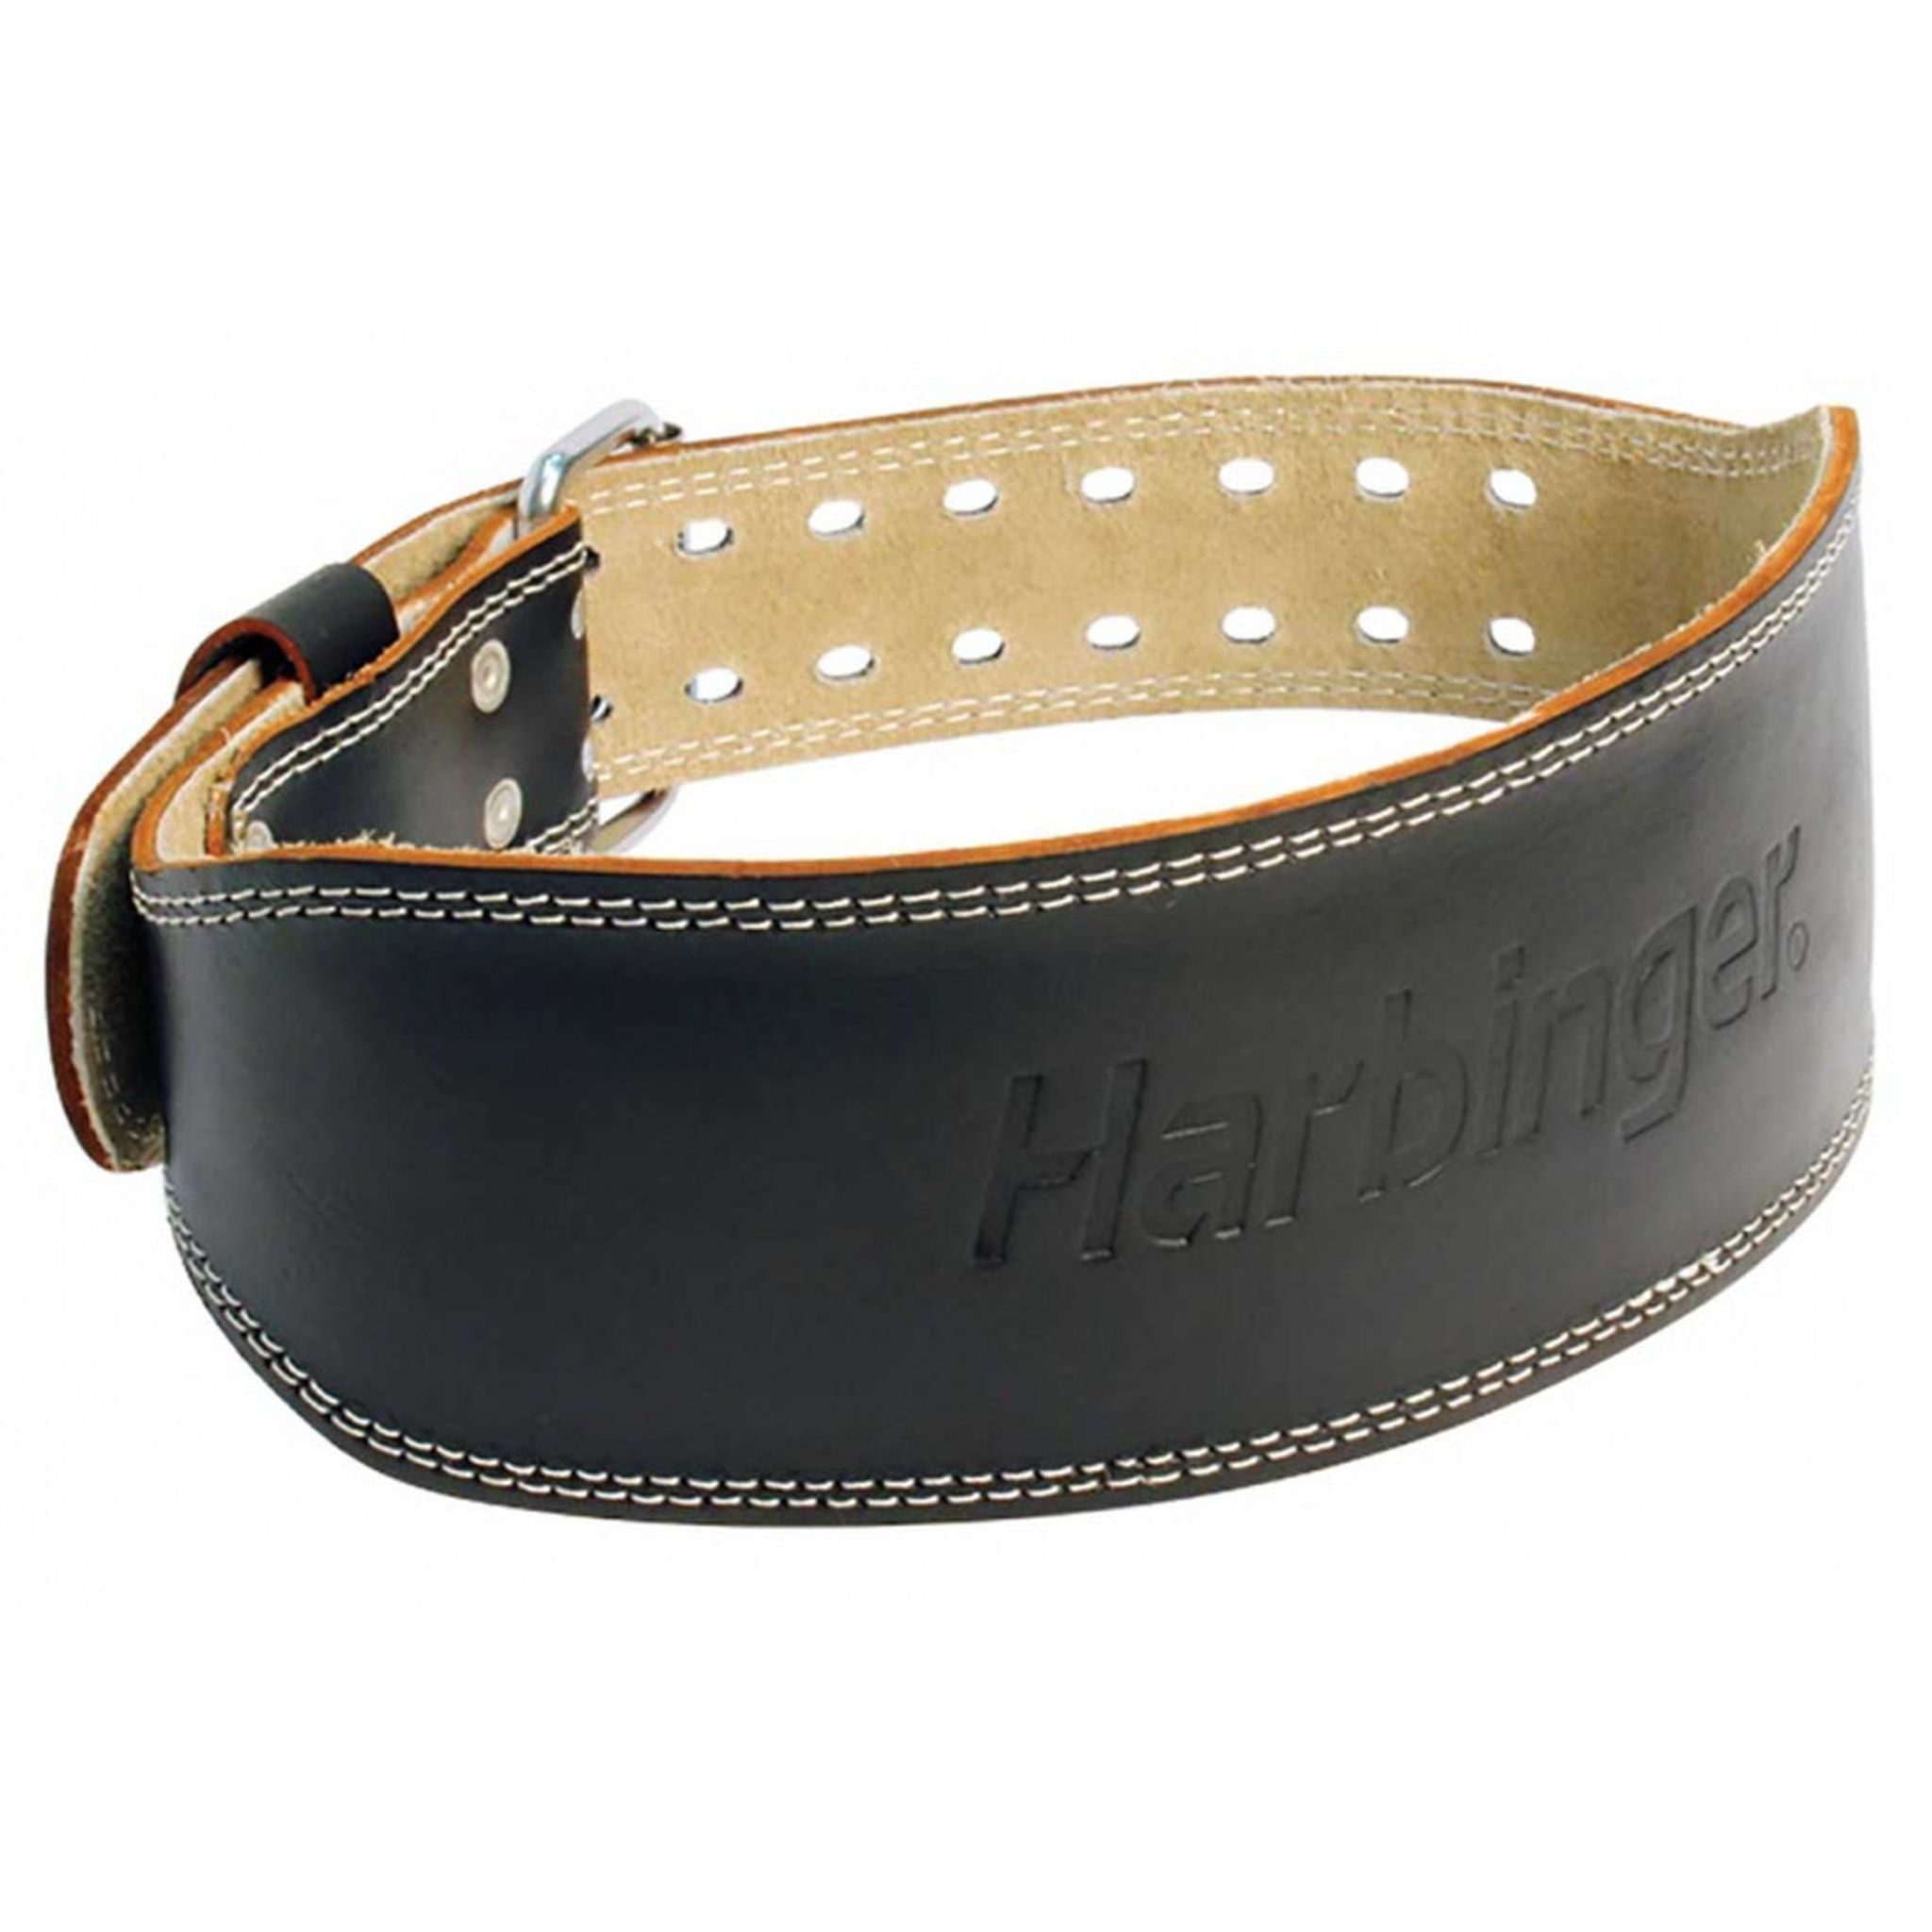 Harbinger 4-inch Padded Leather Weight Belt